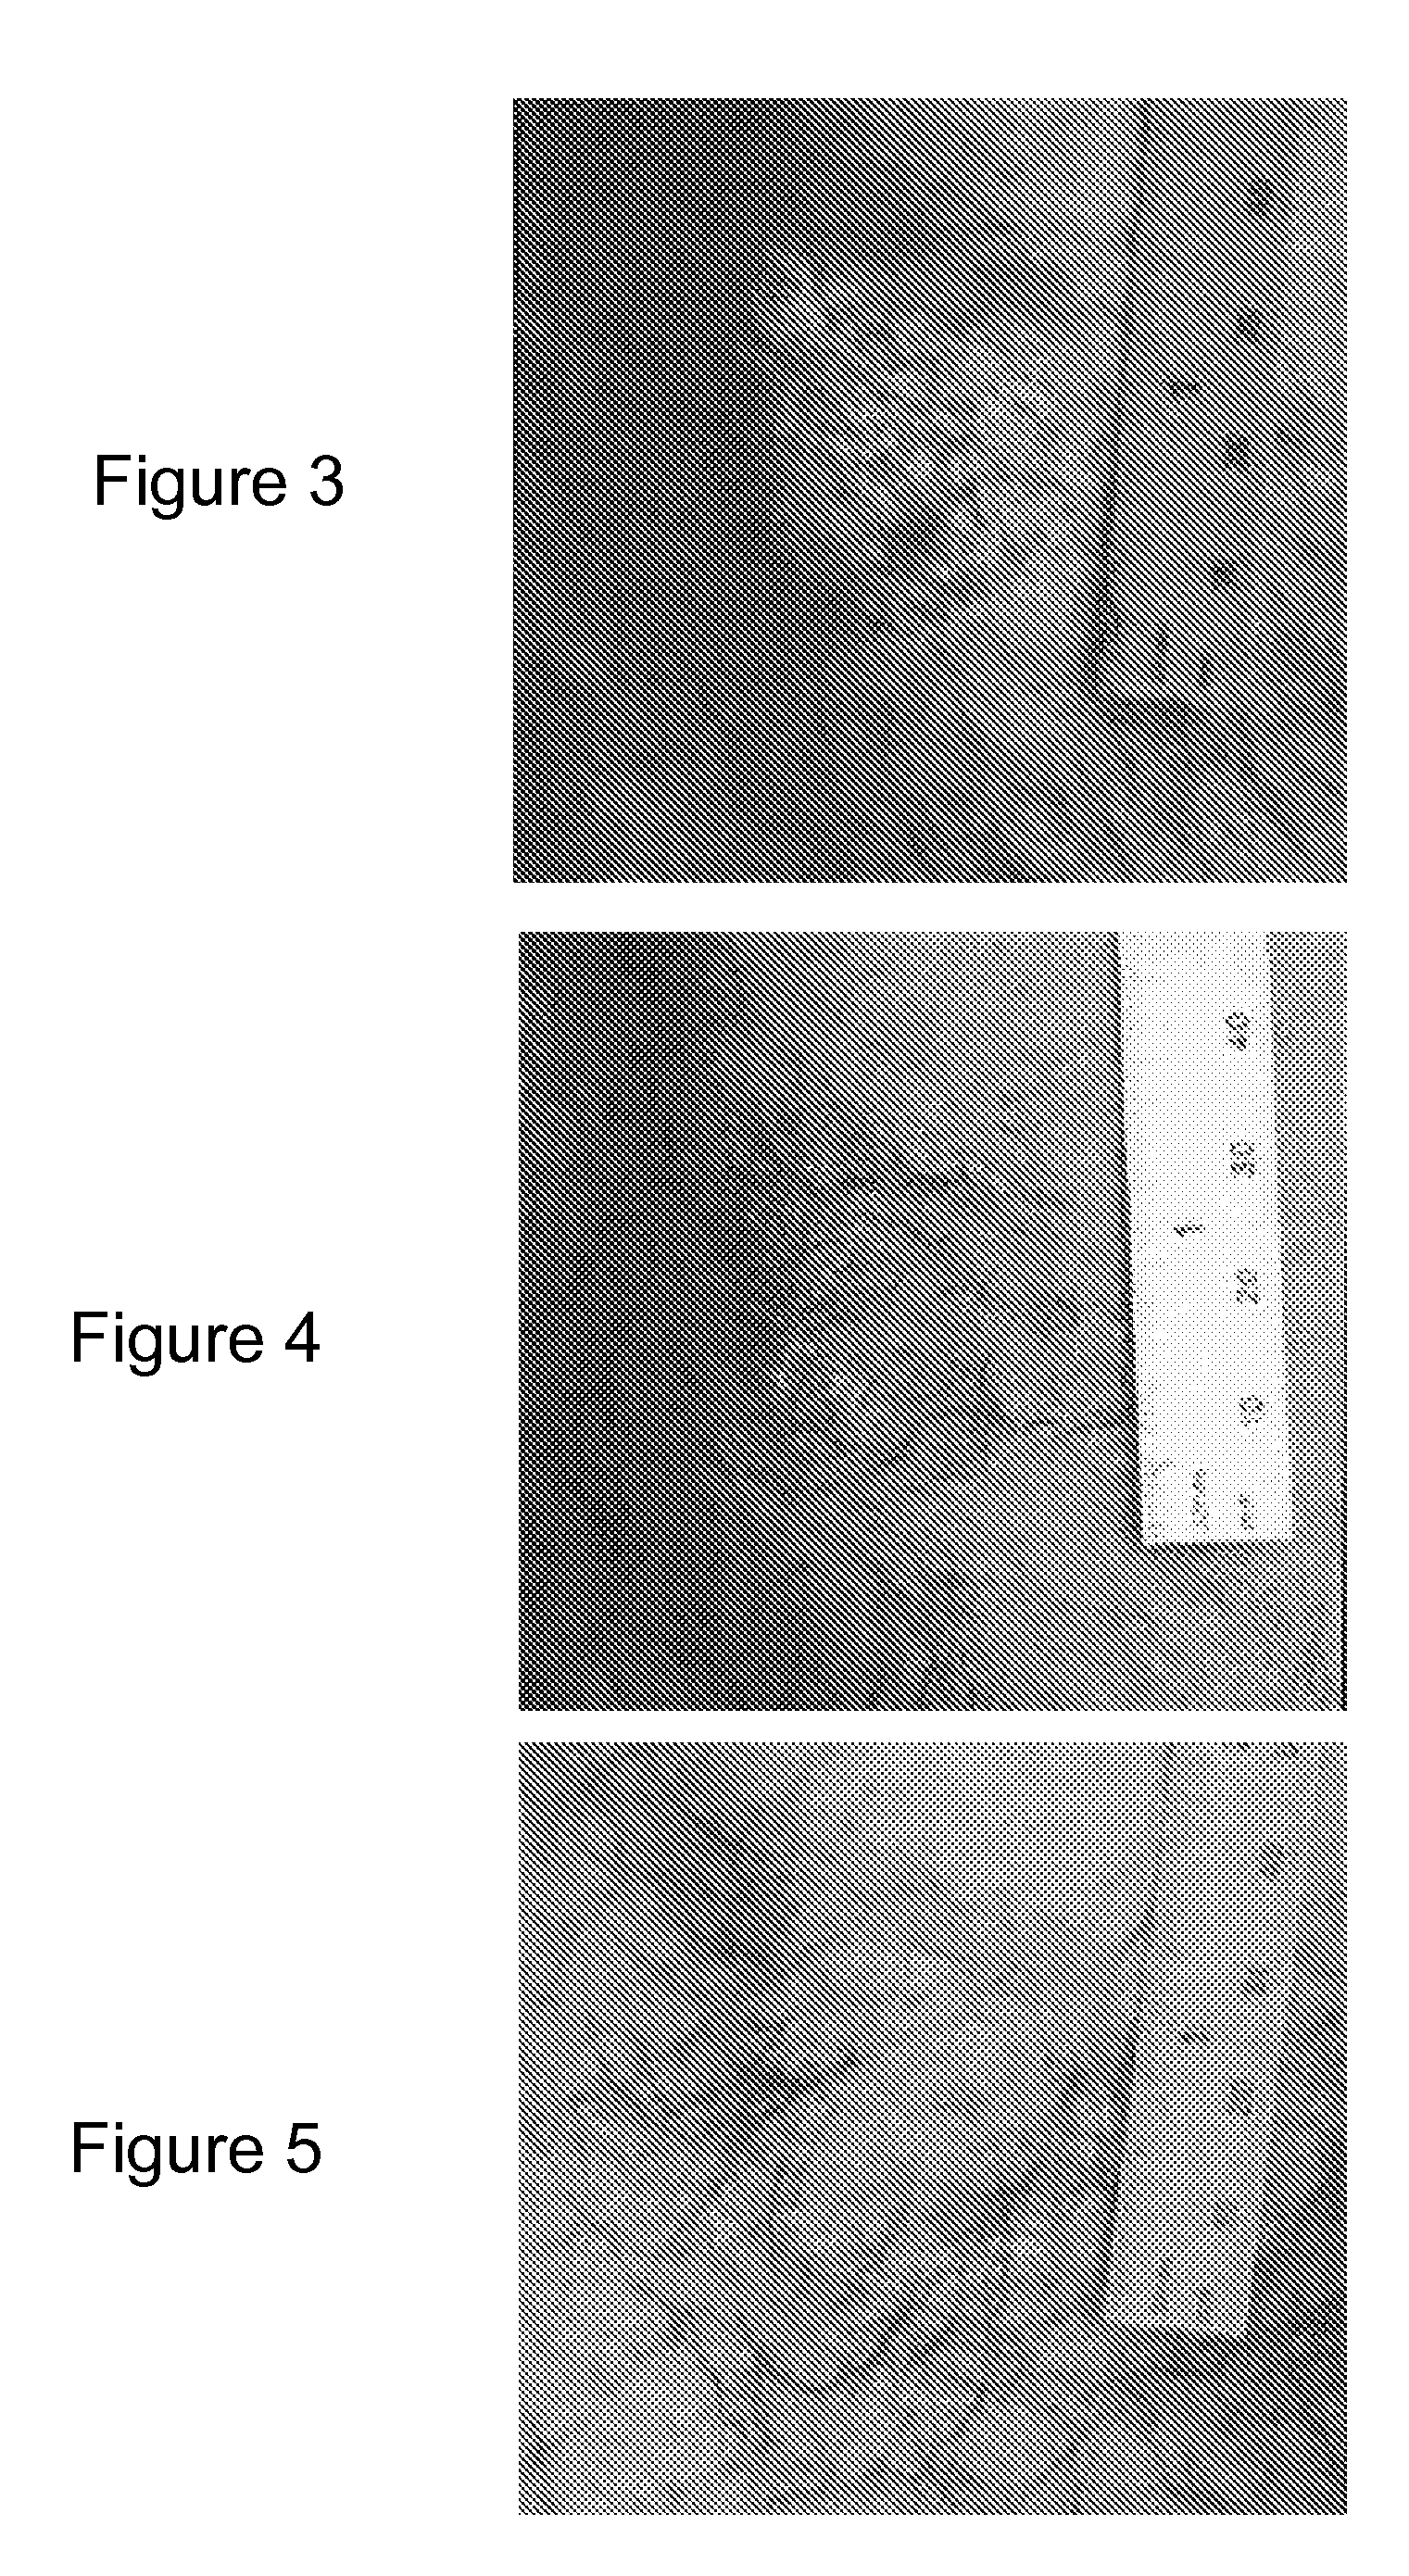 Methods of treating skin disorders with caffeic acid analogs